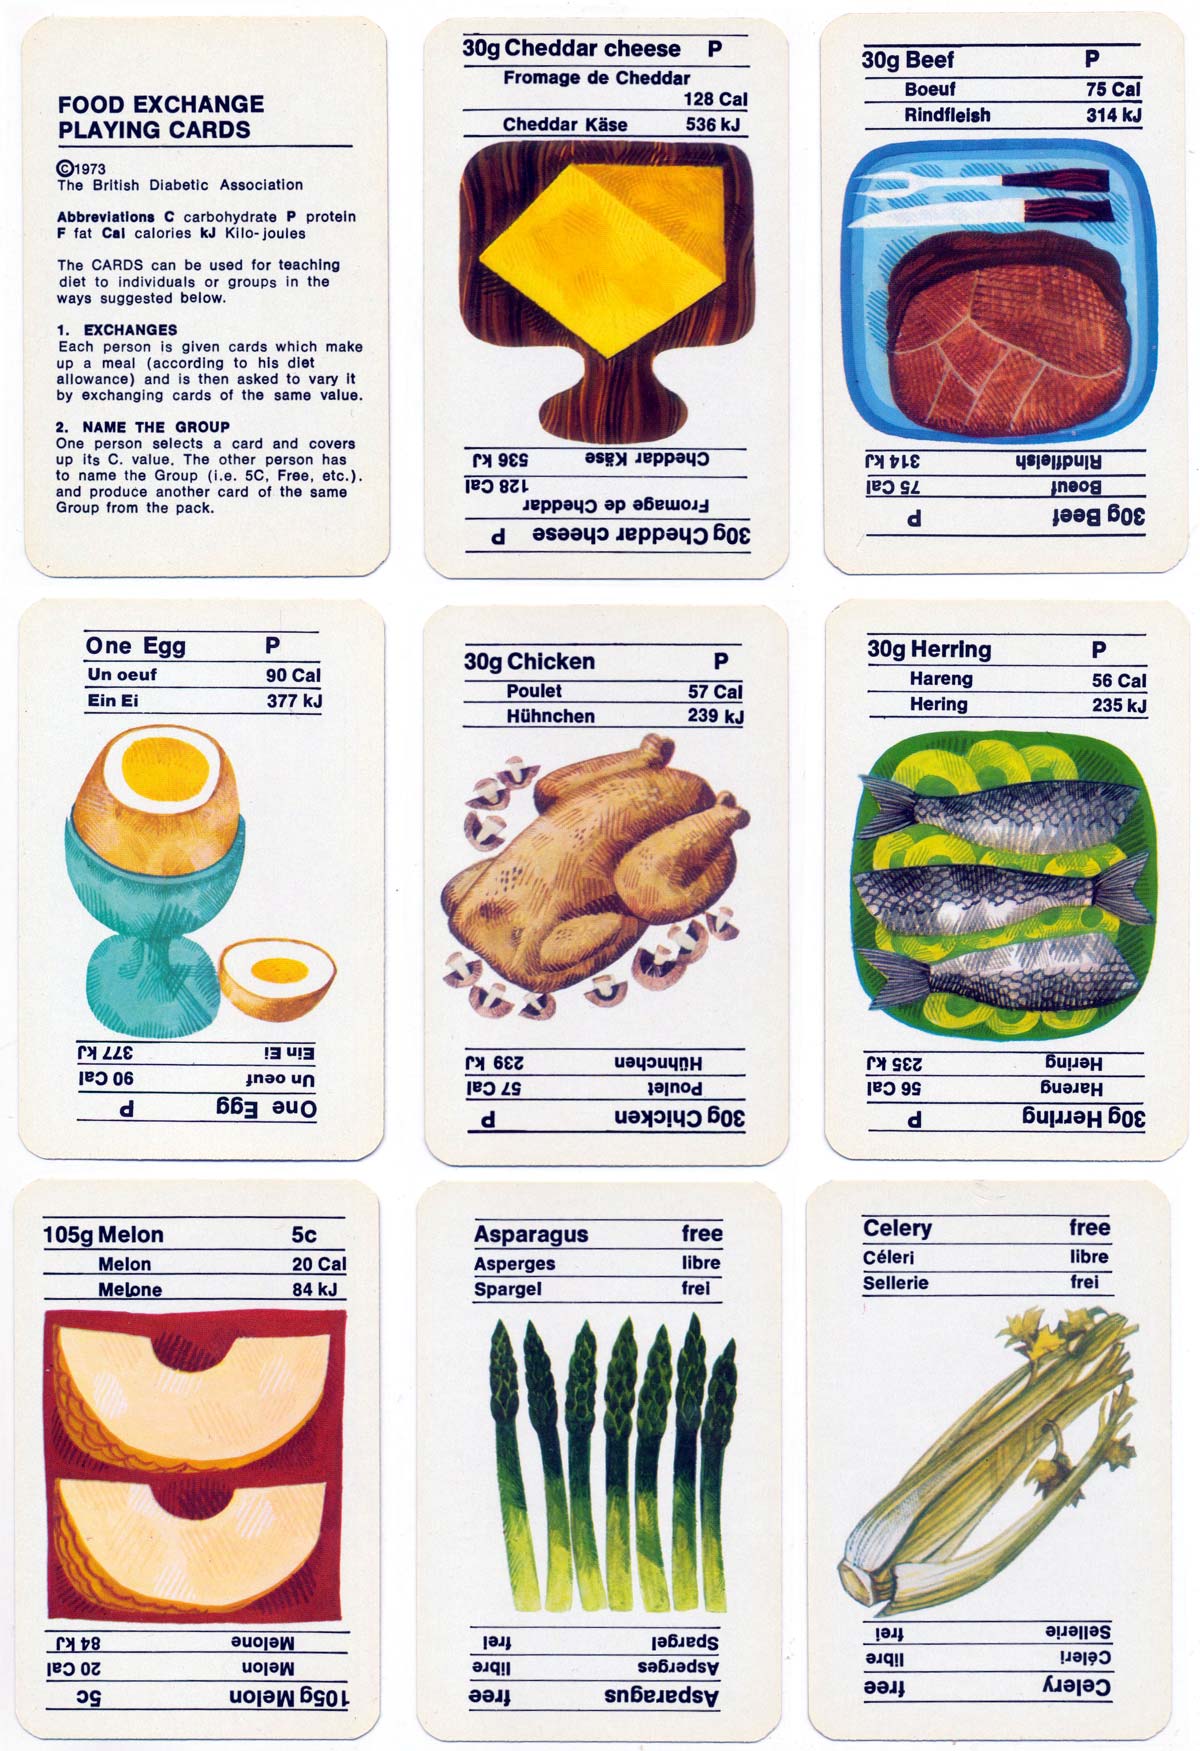 “Food Exchange“ playing cards designed by Ralph Dobson for the British Diabetic Association, 1973